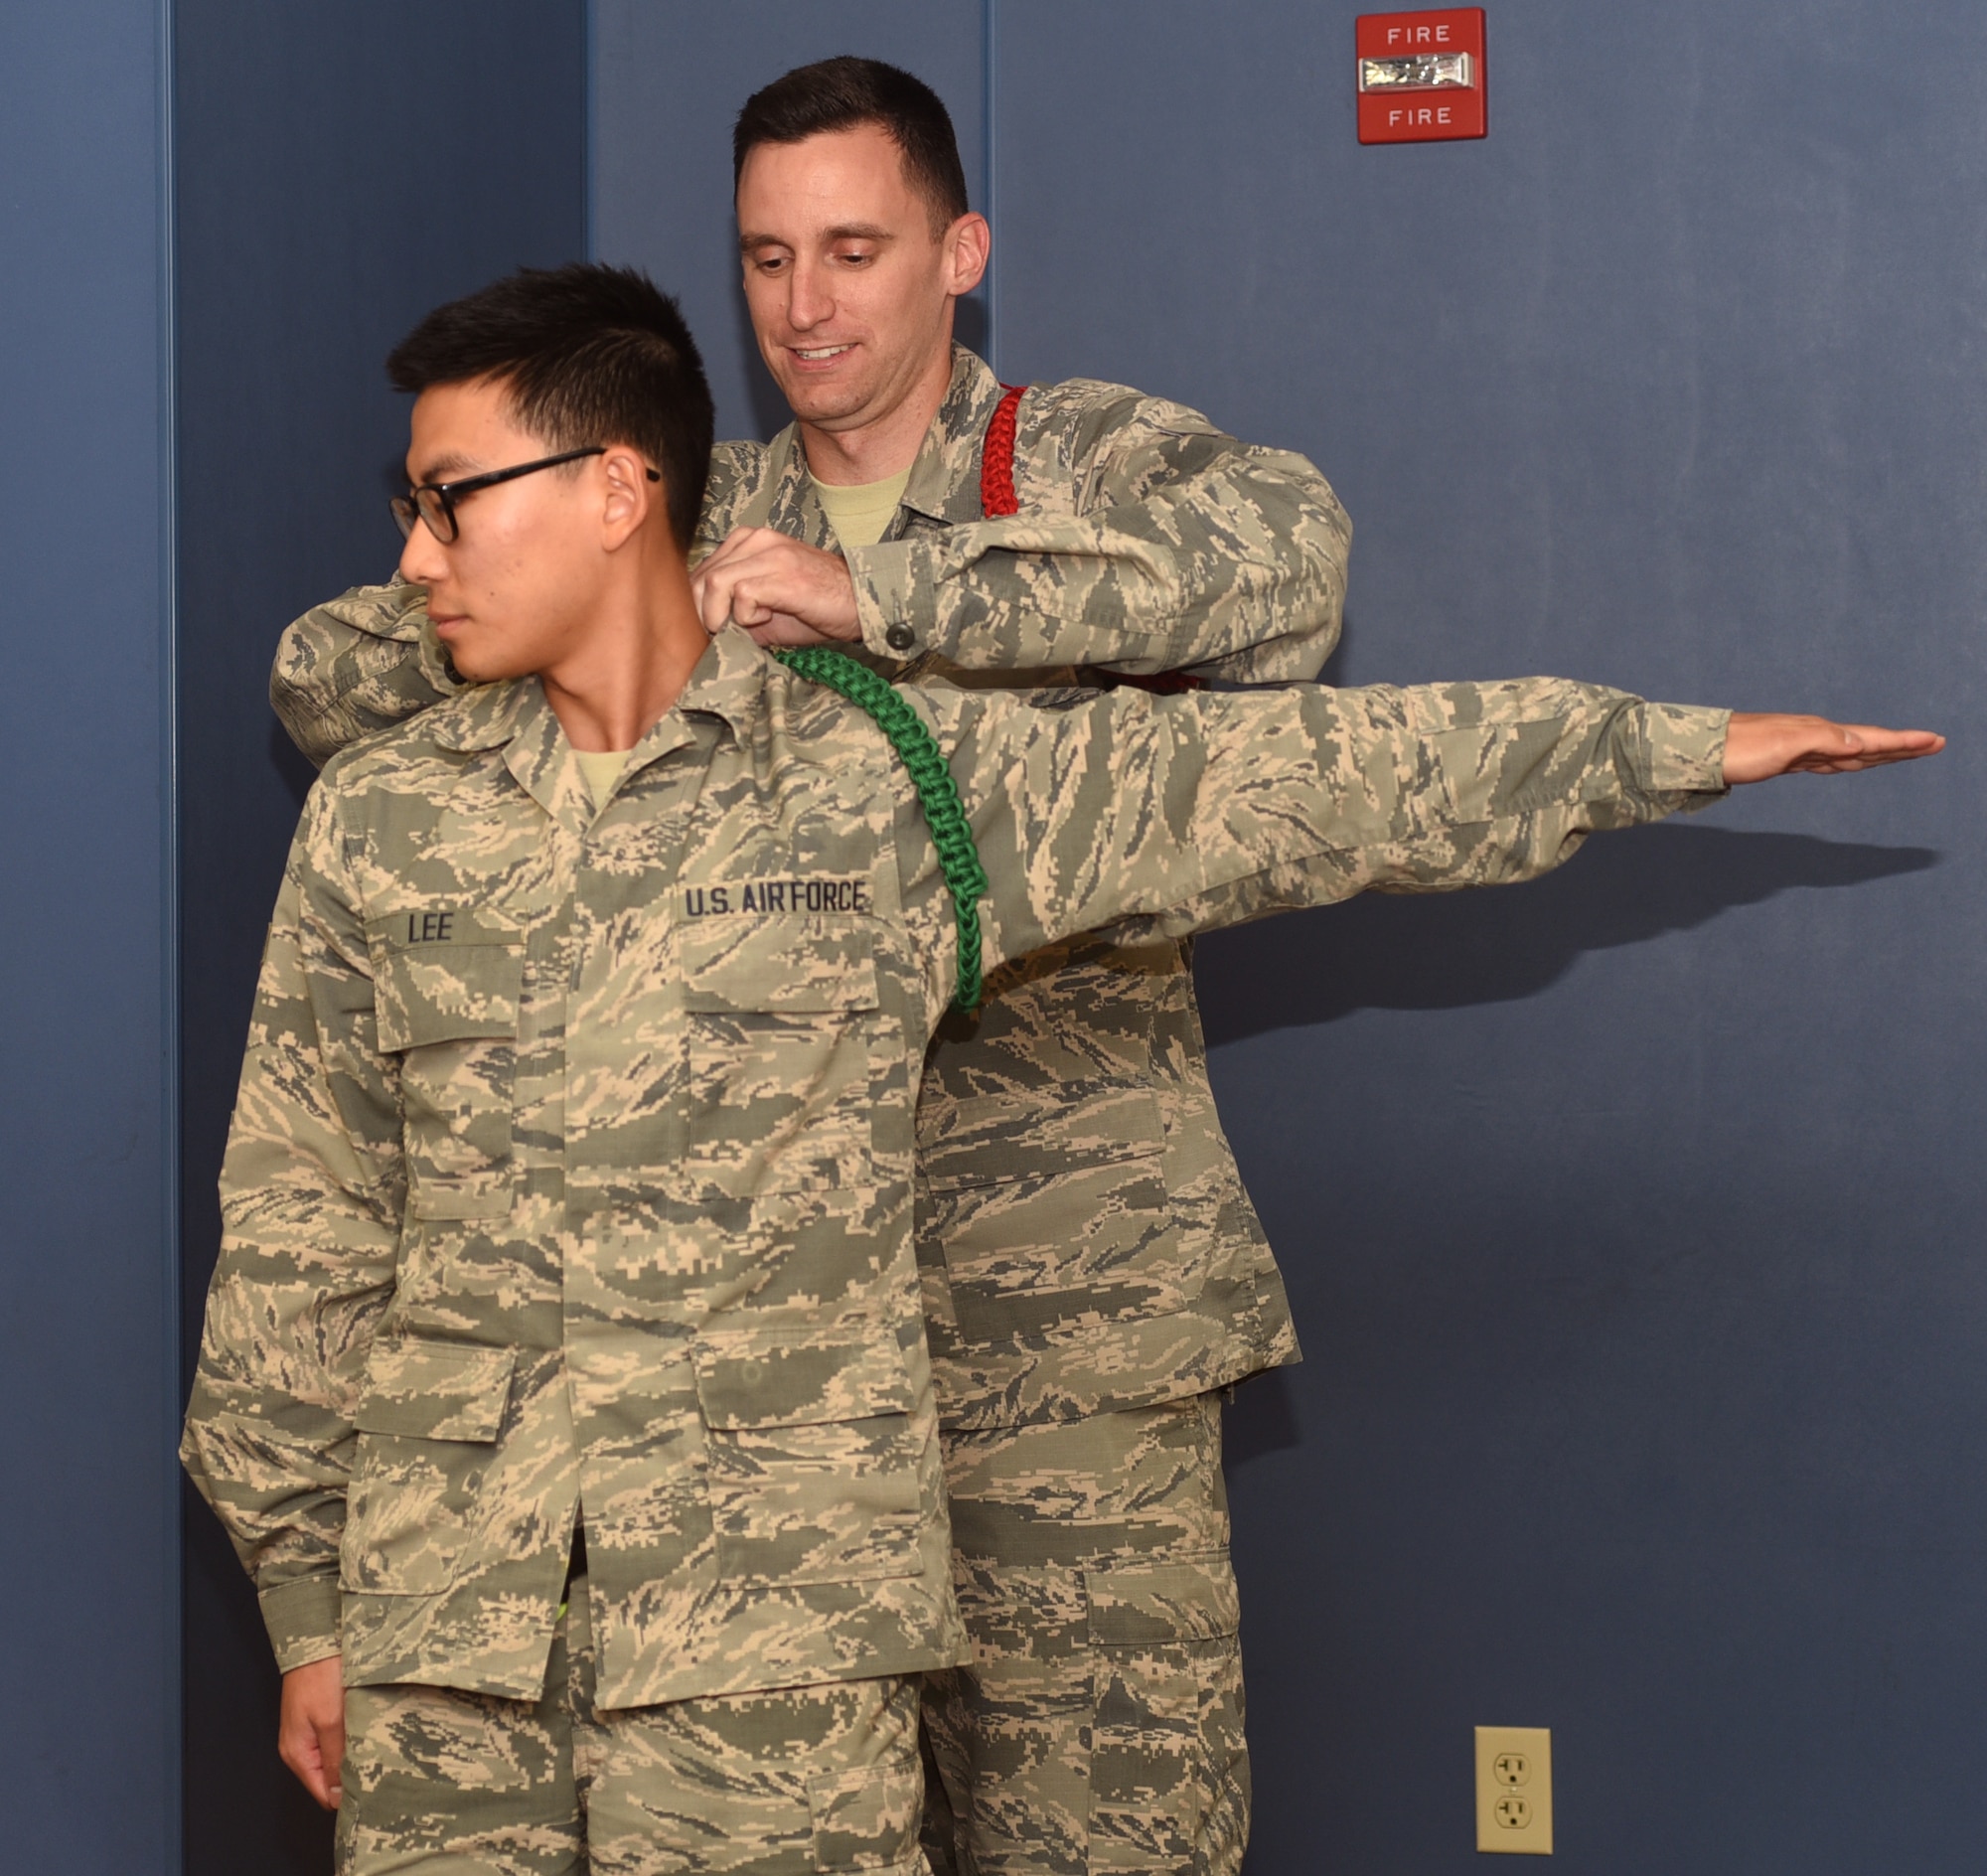 U.S. Air Force Airman 1st Class Spencer Neveaux, 316 Training Squadron student and red rope level Airman Leader, pins a green rope onto Airman 1st Class James Lee, 316th TRS student at the 316th TRS  on Goodfellow Air Force Base, Texas, May 14, 2019. Lee was one of five Airmen selected for the entry level Airman Leader position after completing six weeks of the on the job training while fulfilling a variety of Whole Airman tasks. (U.S. Air Force photo by Airman 1st Class Abbey Rieves/Released)